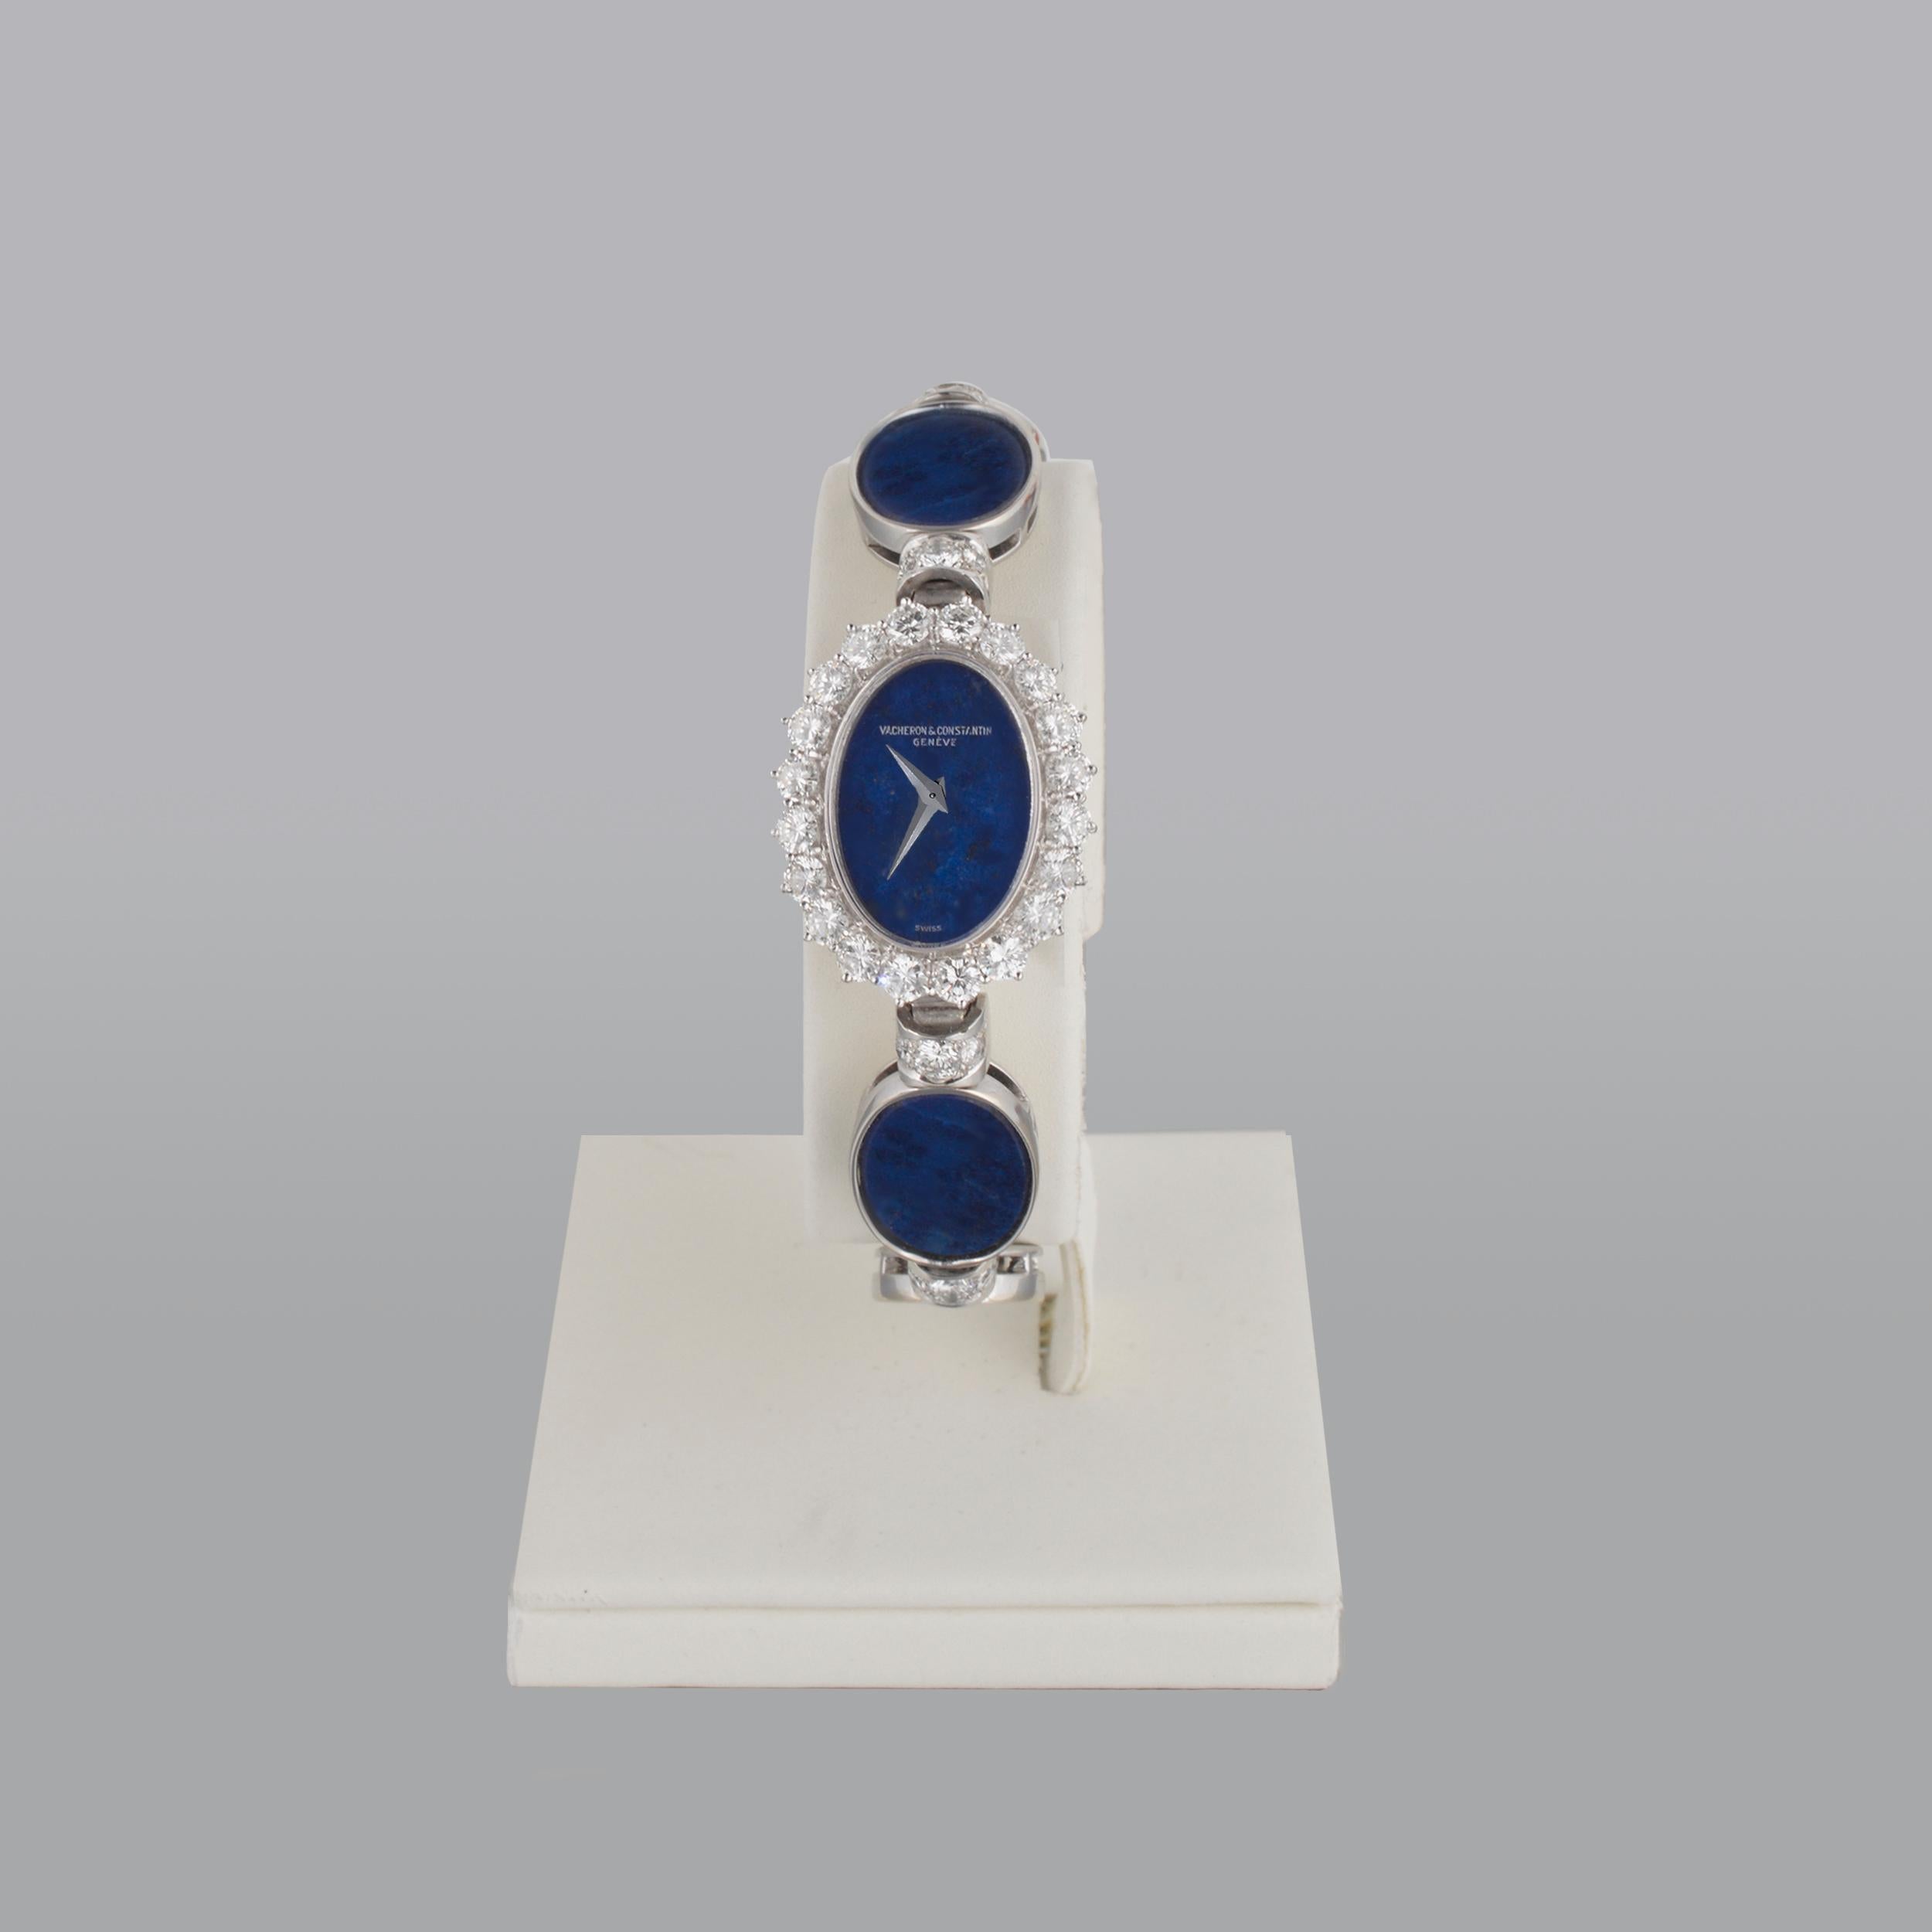 18k White Gold
4 ct Diamonds
Lapis Lazuli
Made in Switzerland
Weight: 42g
Comes with a Certificate of Authentication